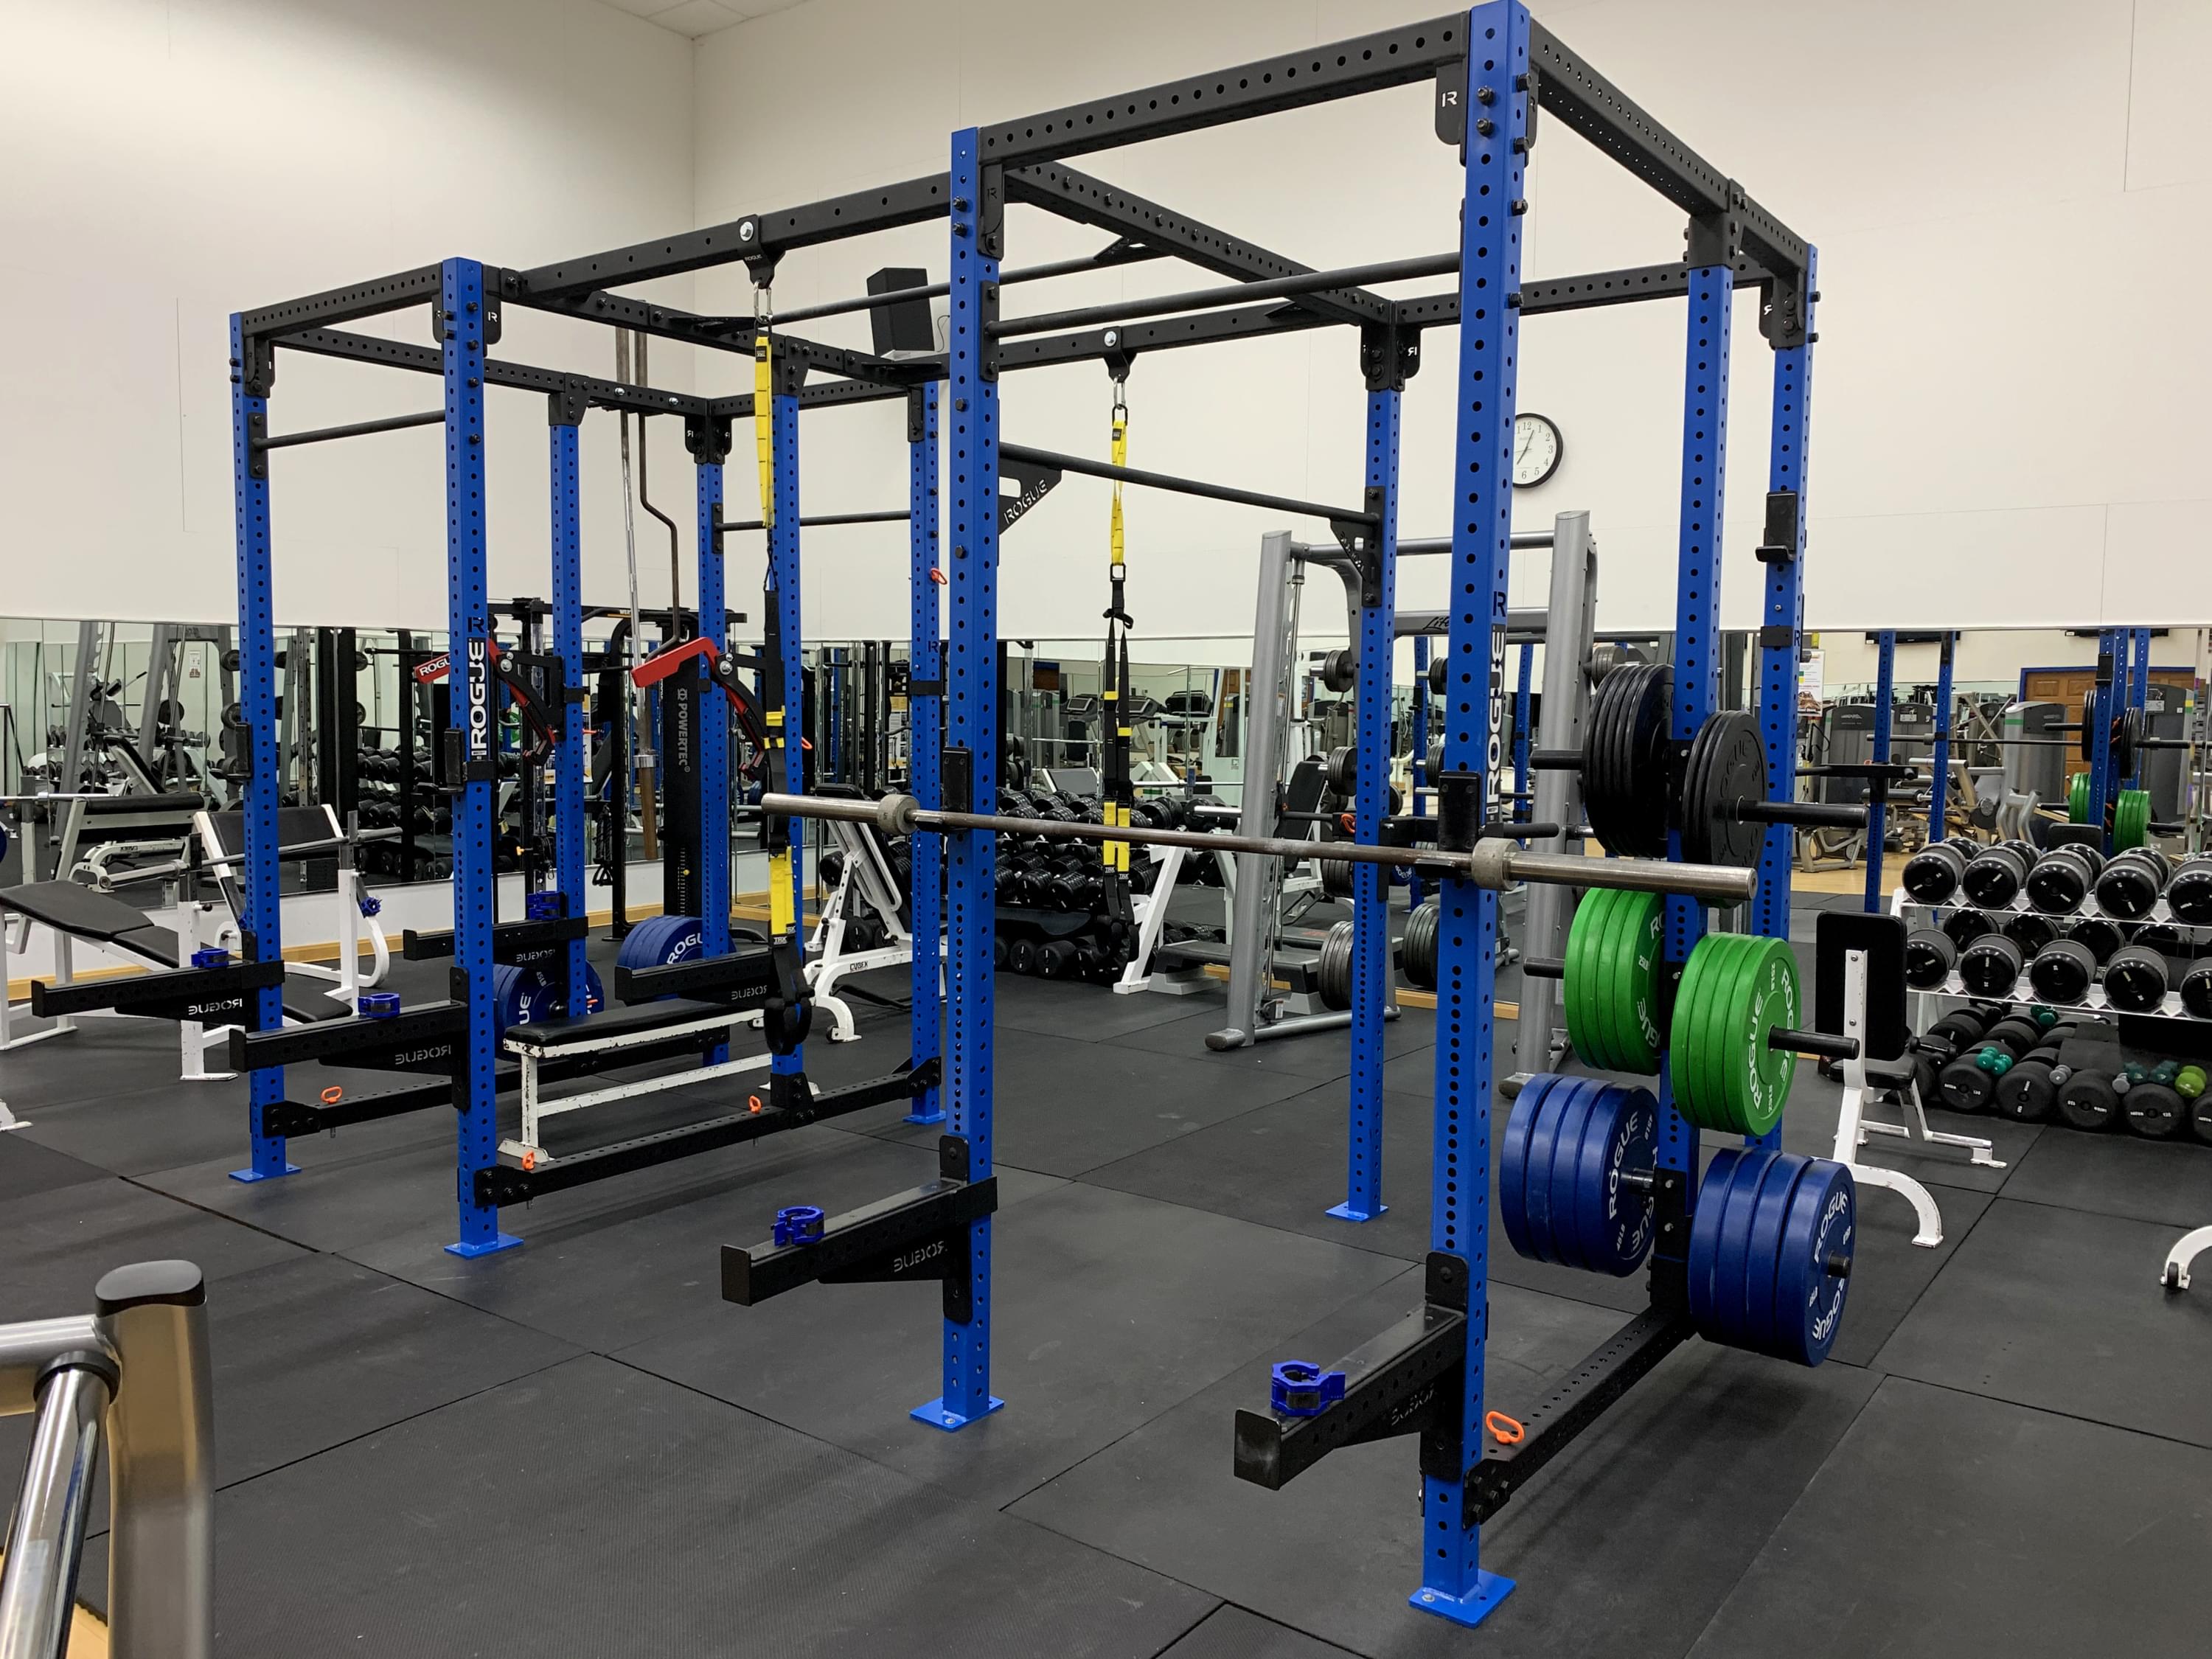 Amazing Fre Weights and Strength Equipment